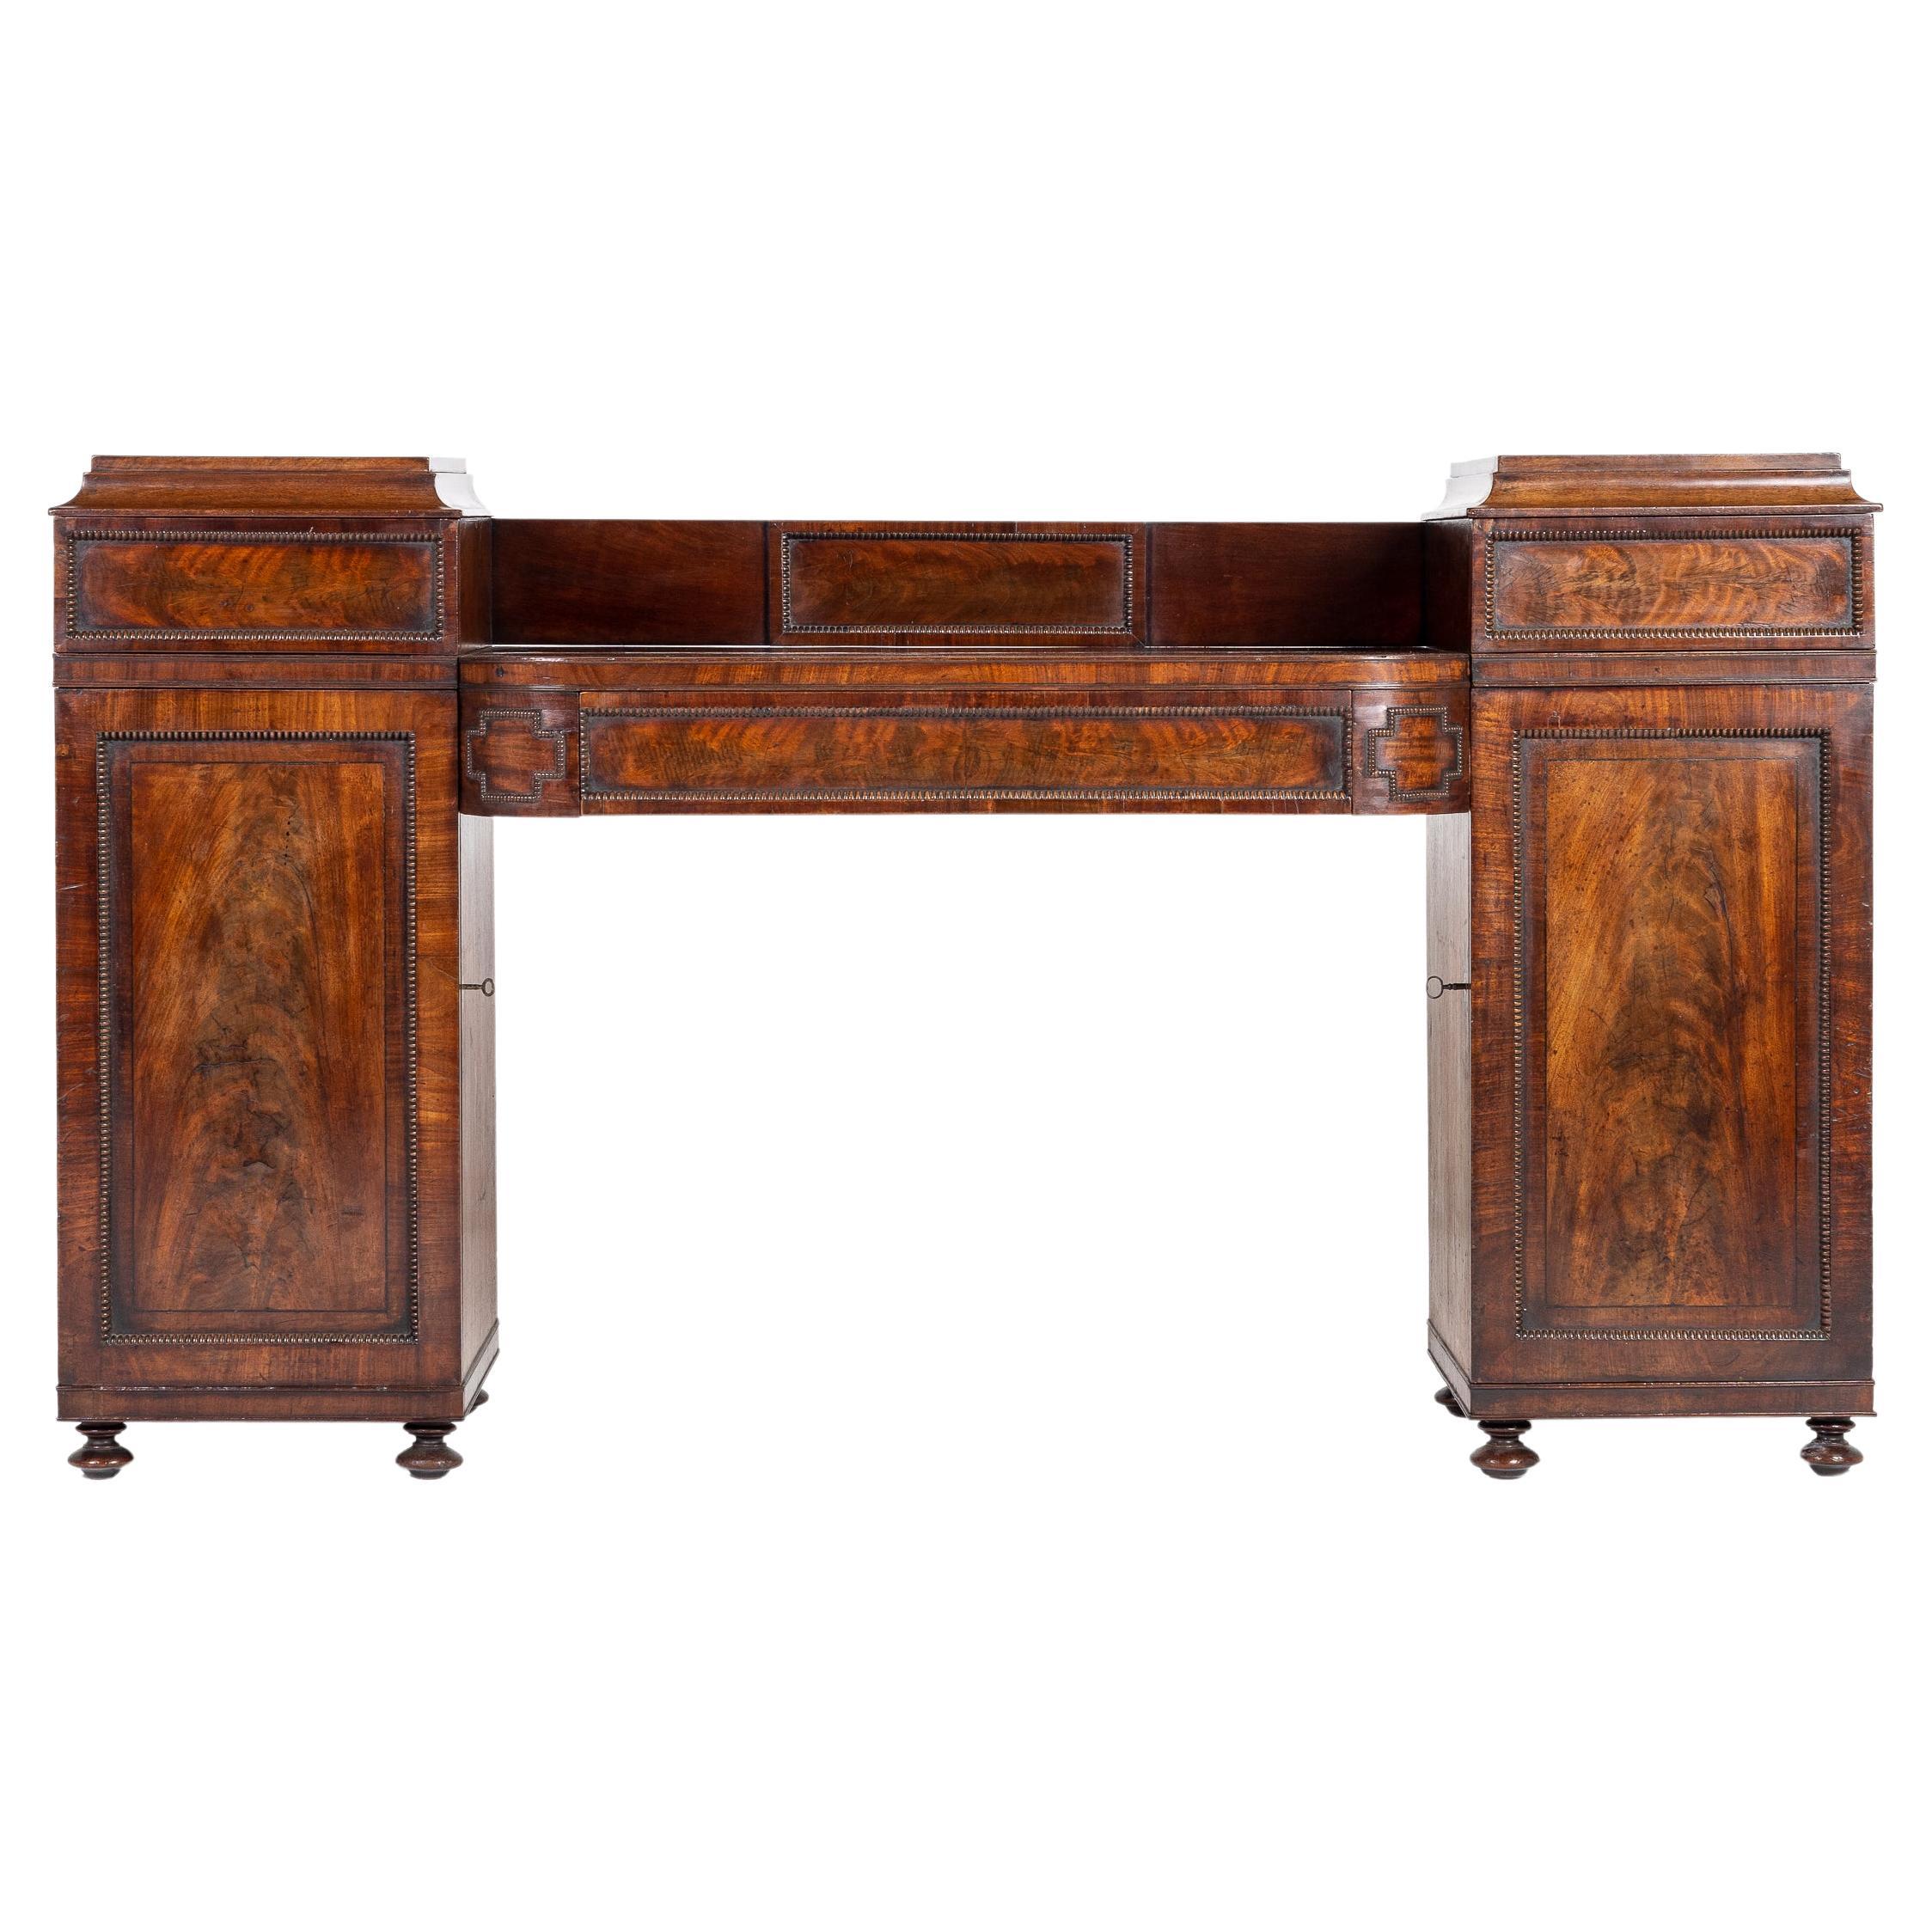 Late George IV/Early William IV Mahogany Pedestal Sideboard For Sale